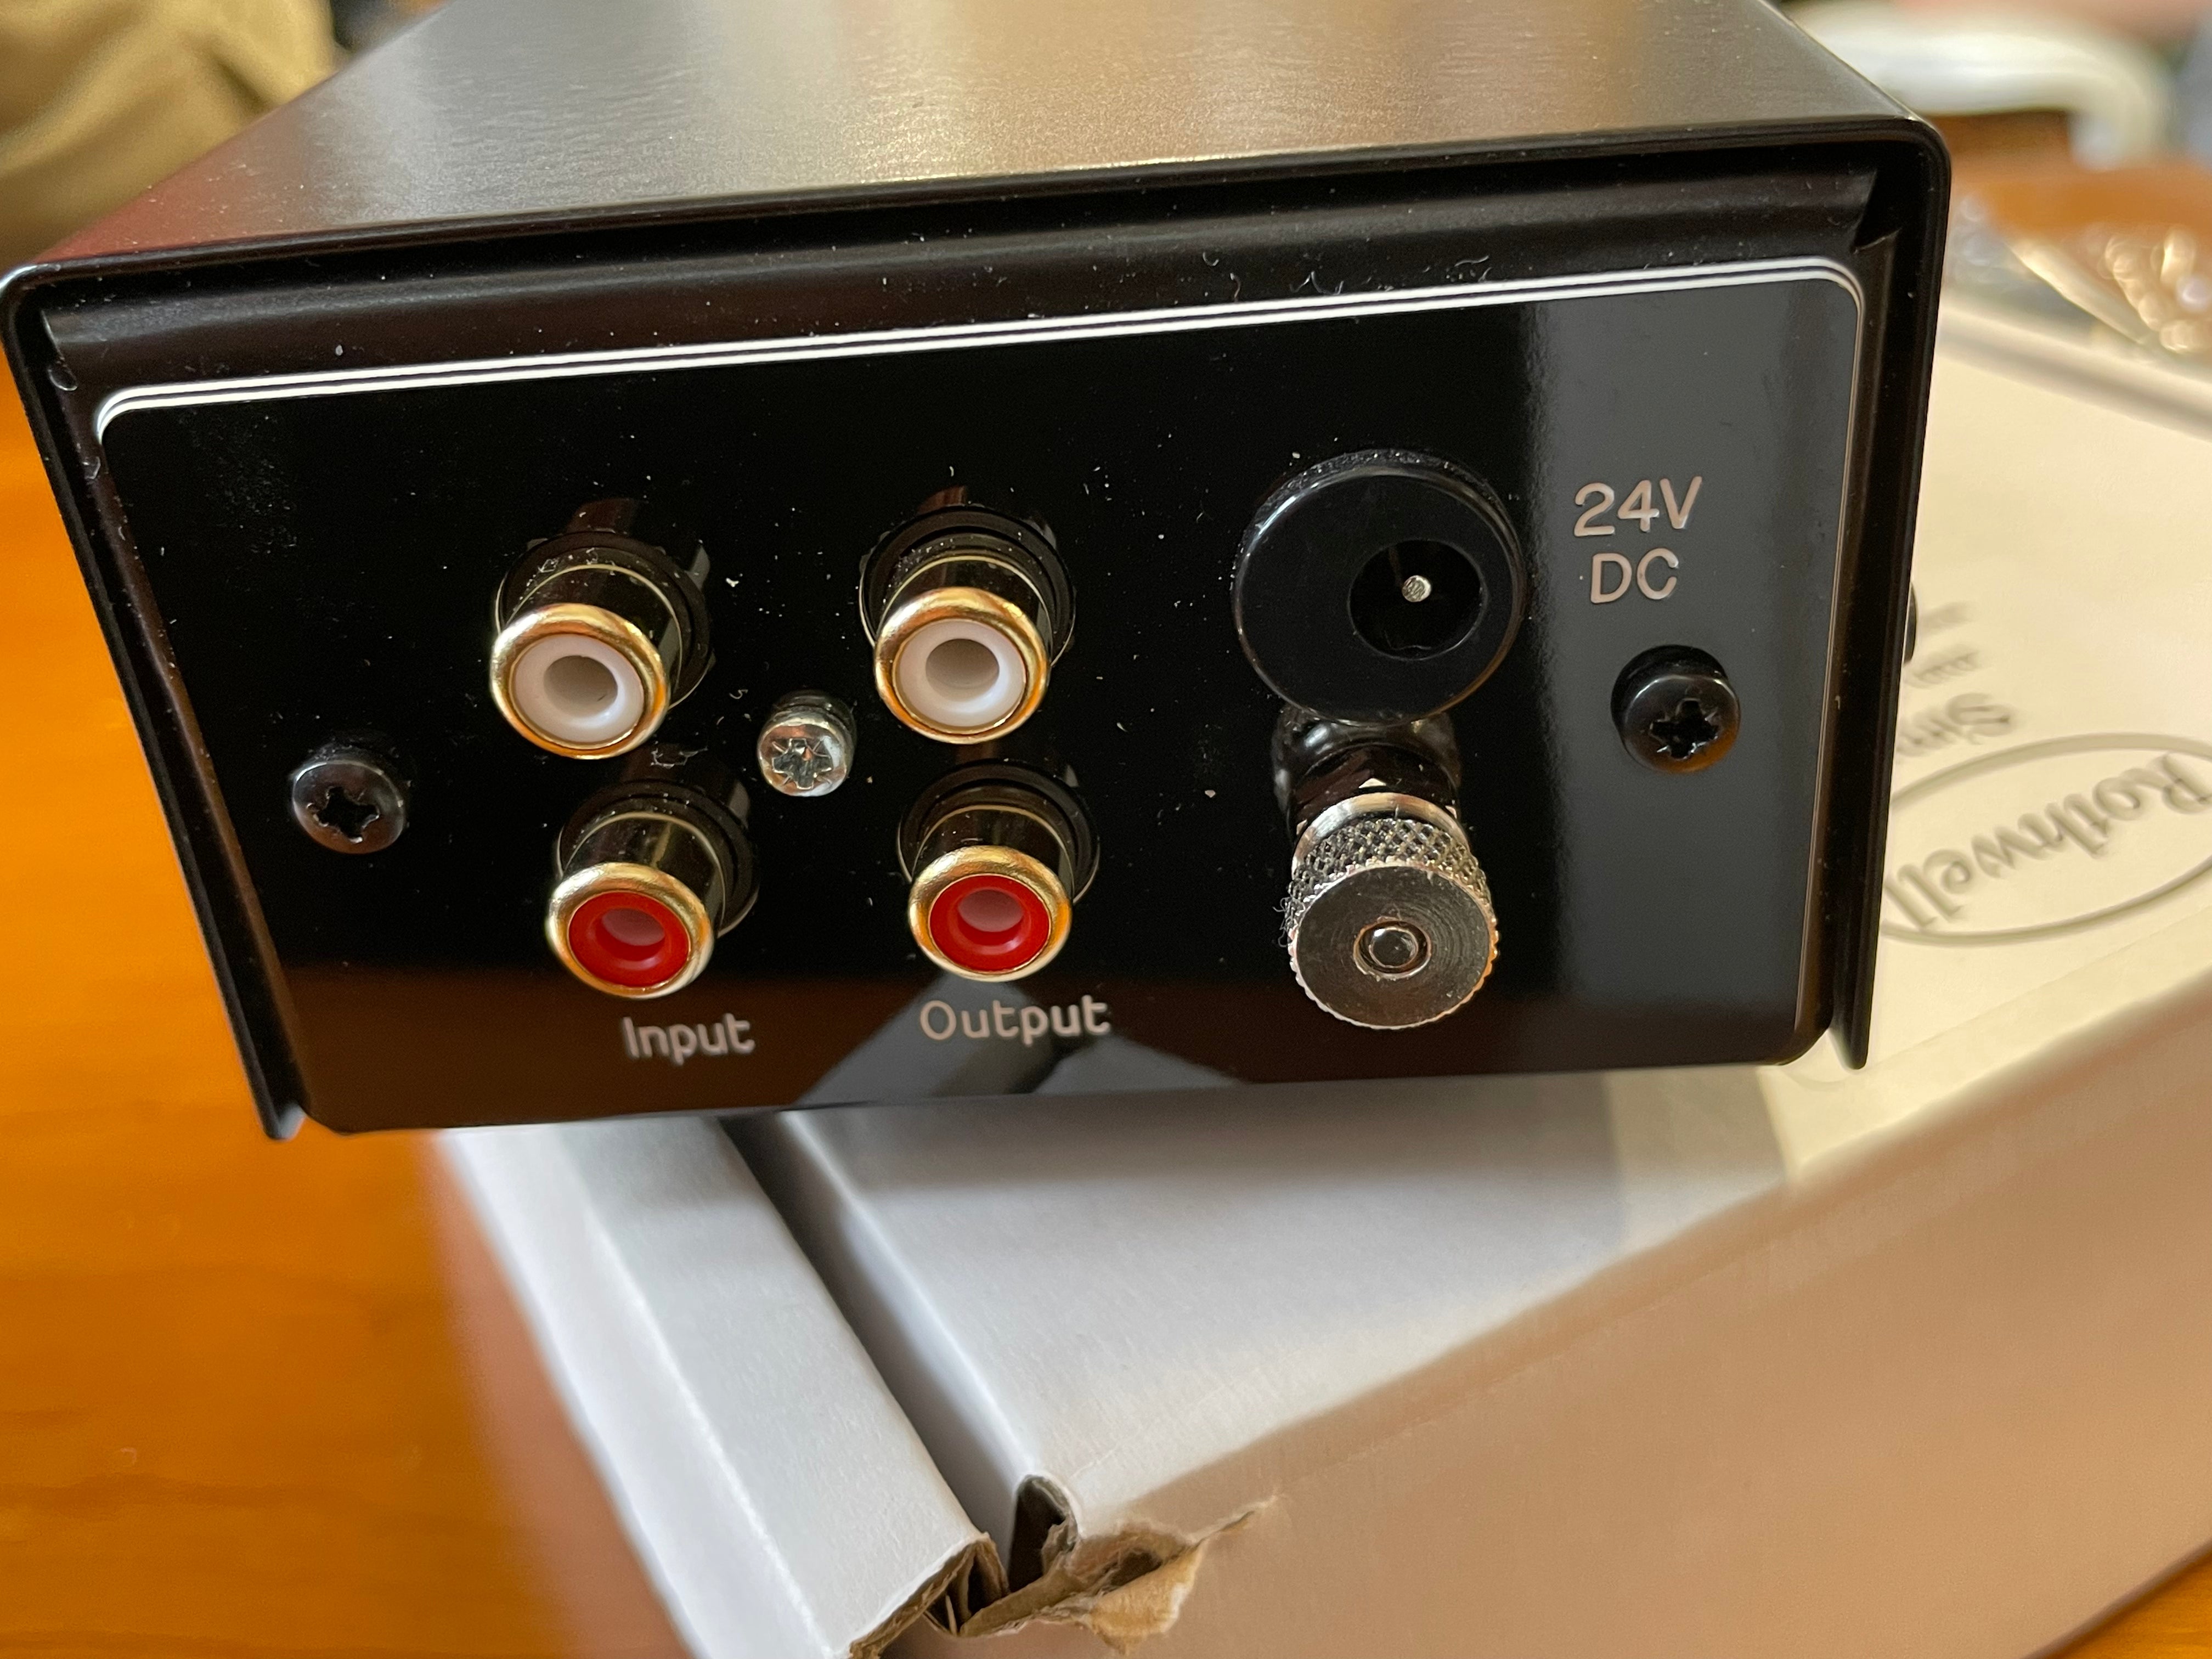 Rothwell, Simplex MM Phono Preamp